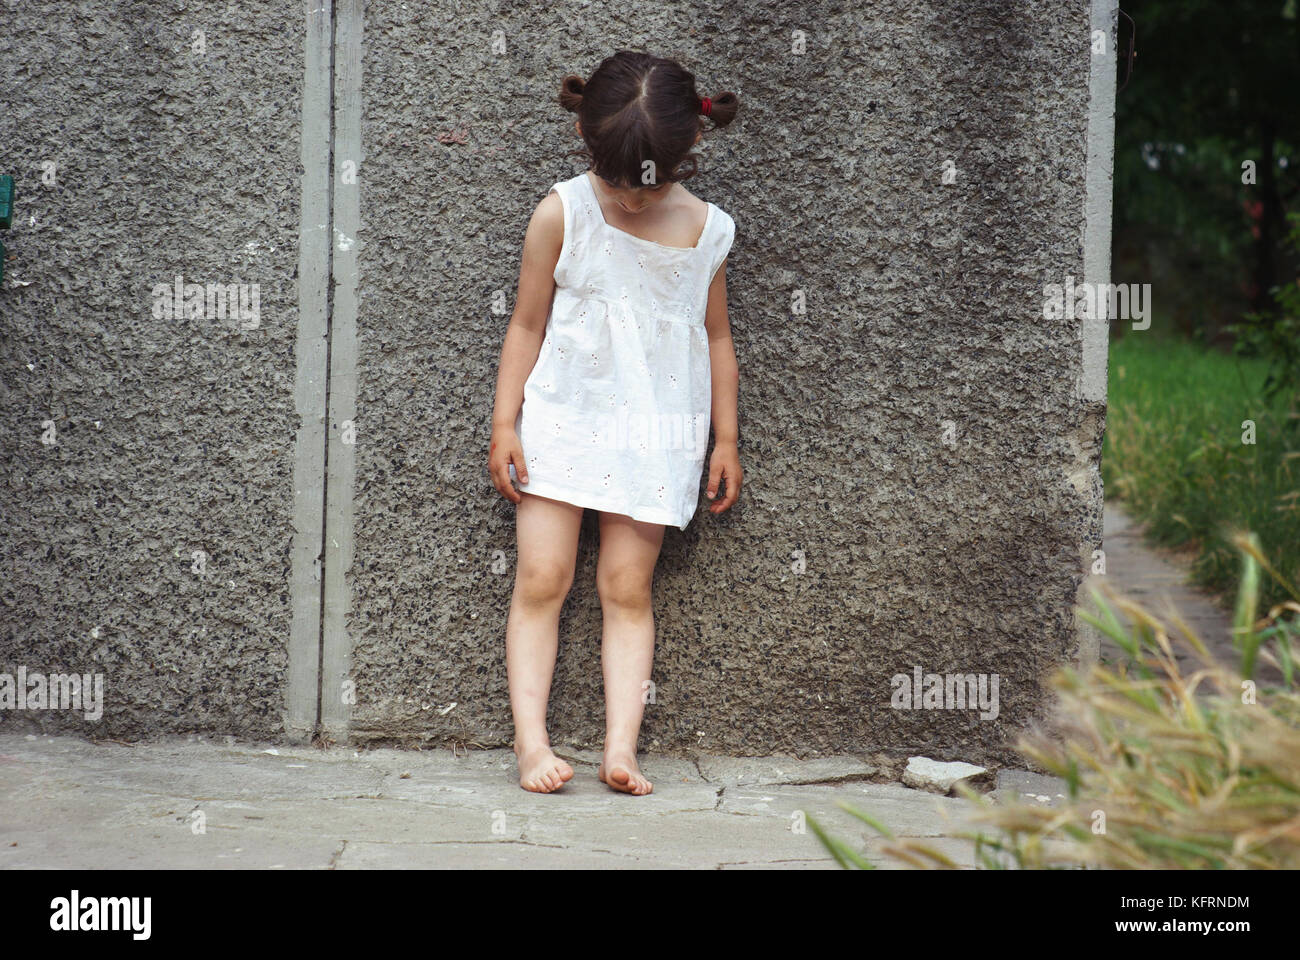 Sad little child (girl) standing against a wall, looking down. Unhappy mood, outside shot Stock Photo